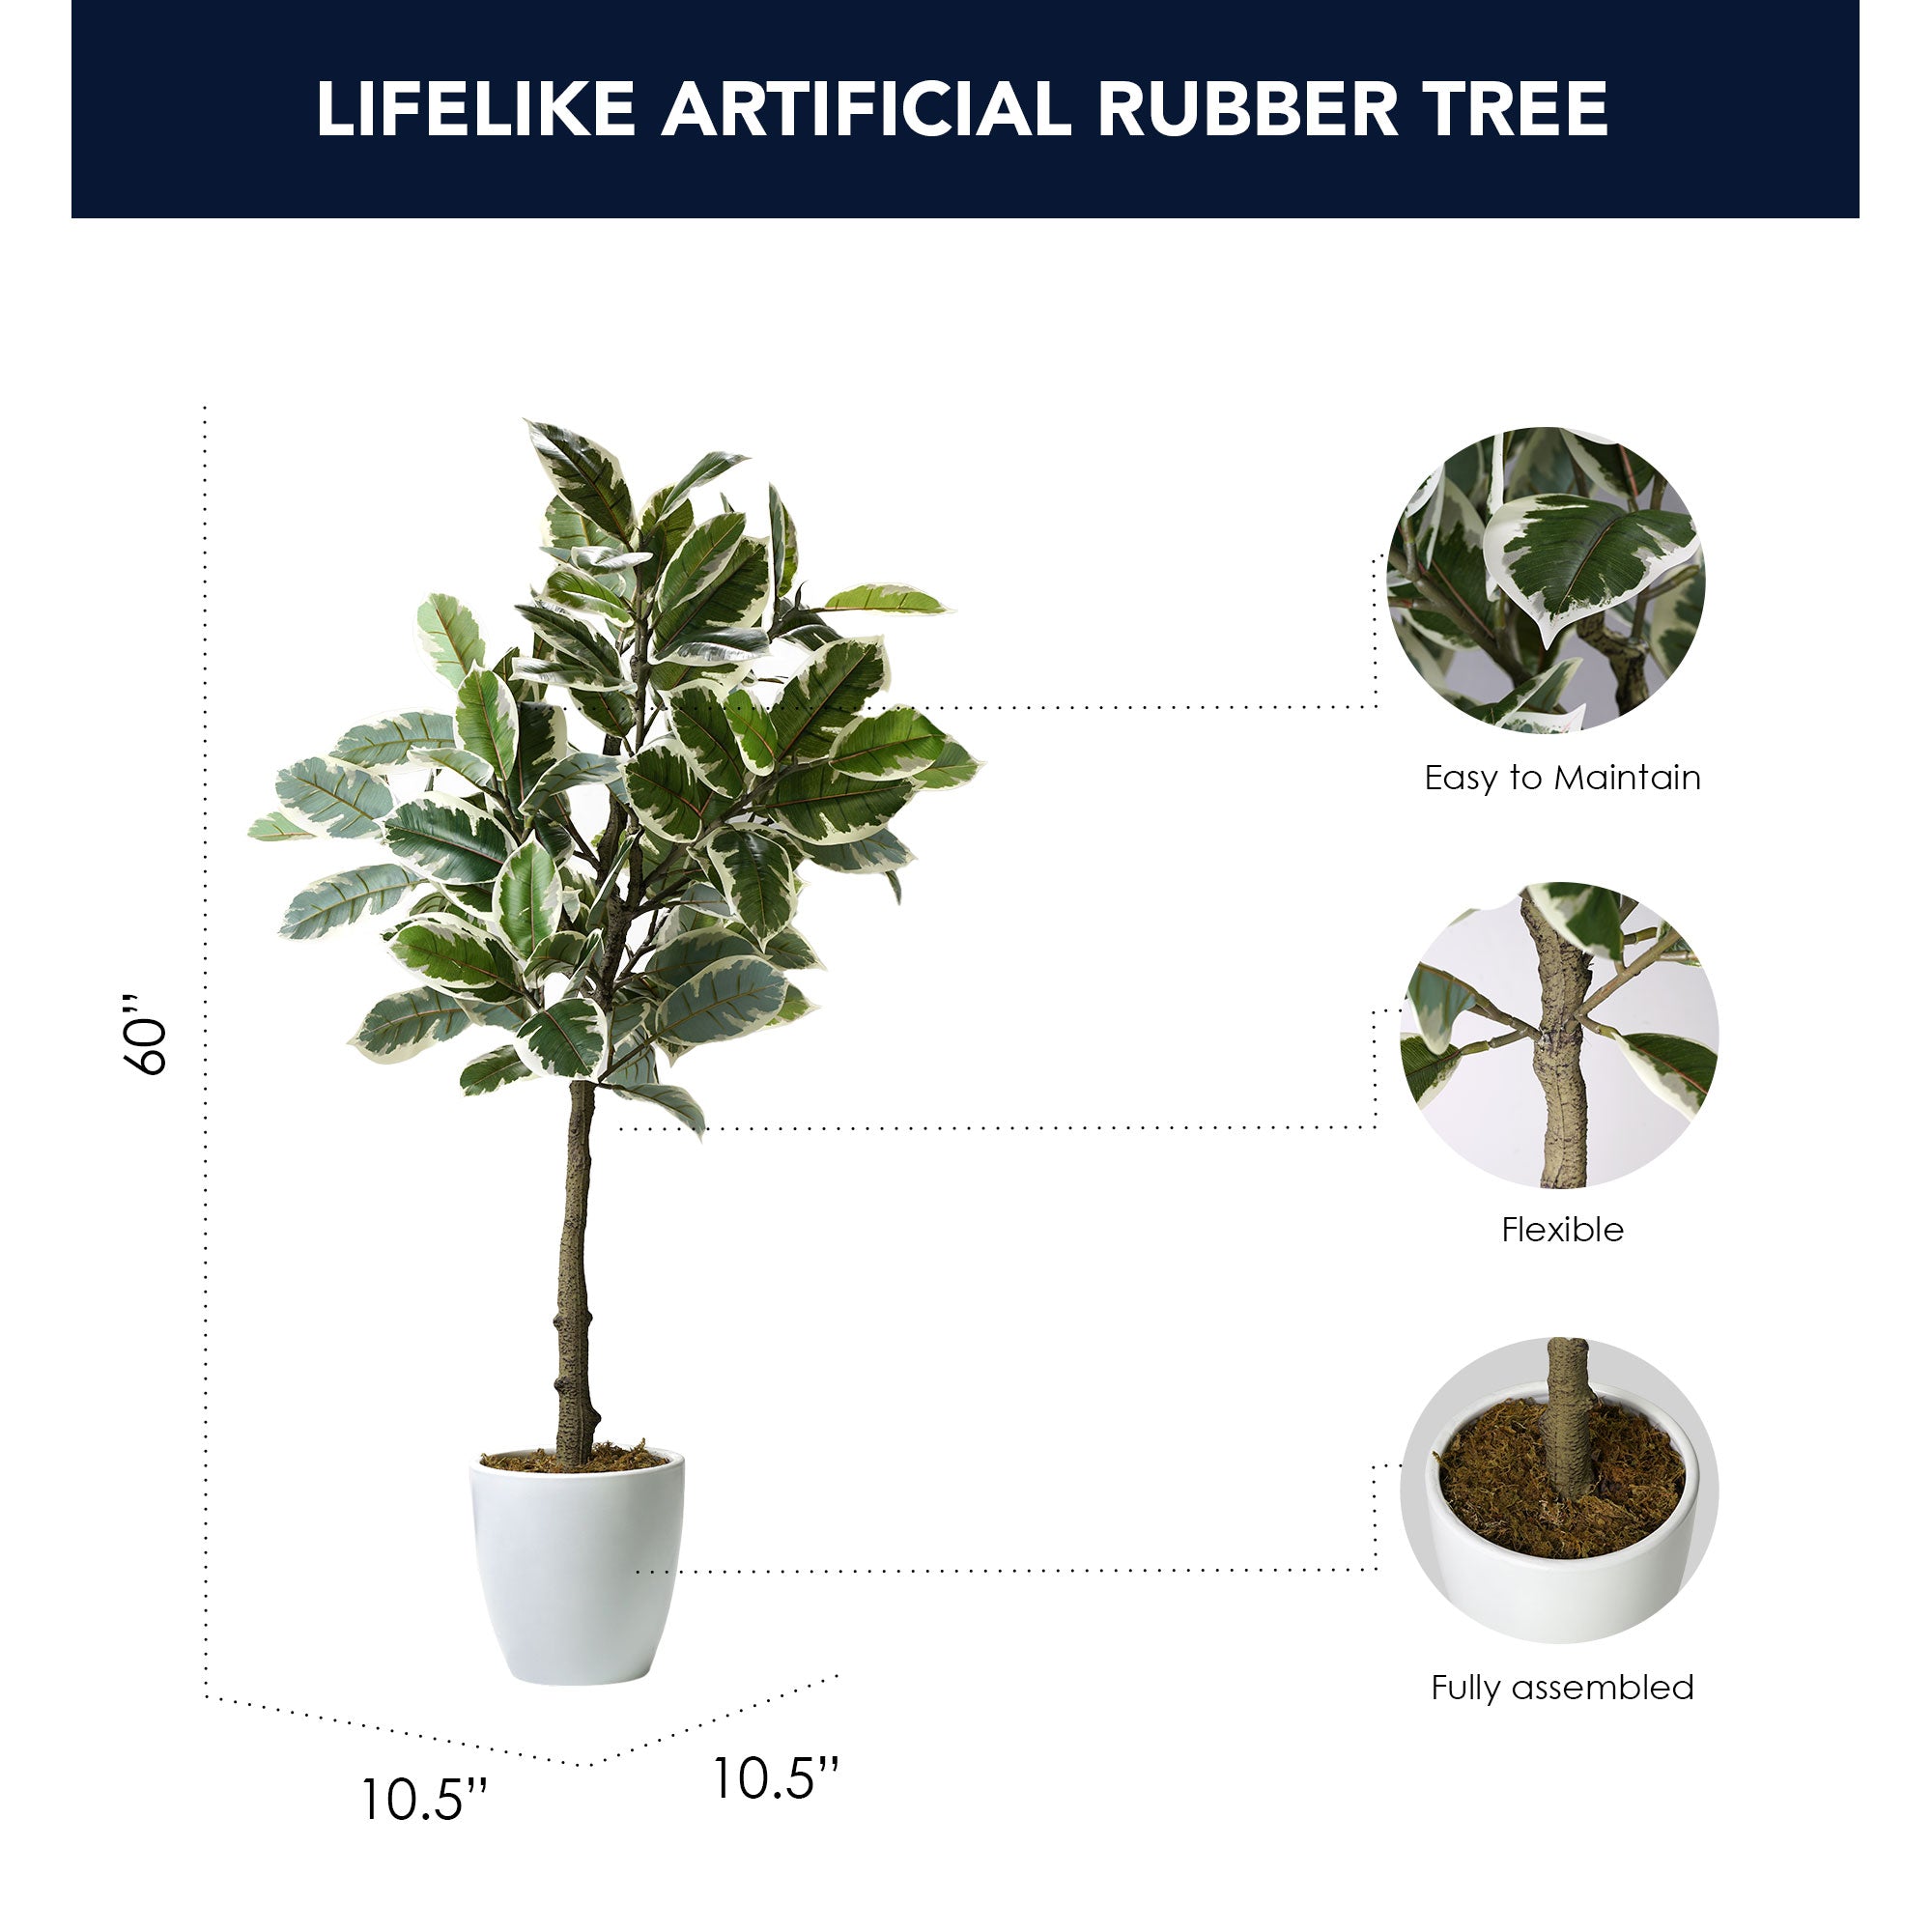 Artificial Variegated Rubber Tree in White Ceramic Tapered Pot - 60